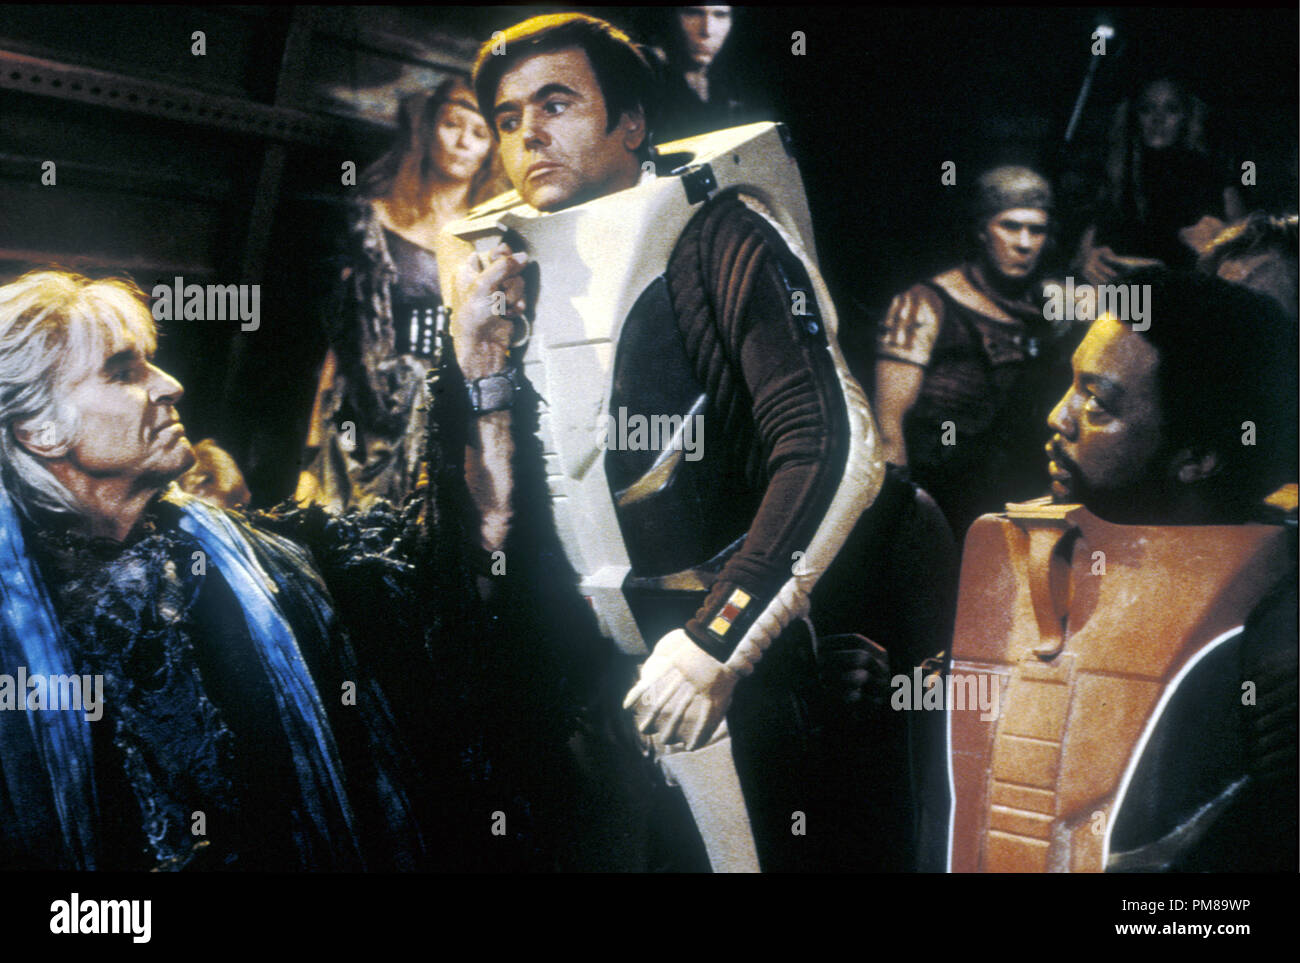 Studio Publicity Still from 'Star Trek II: The Wrath of Khan' Ricardo Montalban, Walter Koenig, Paul Winfield © 1982 Paramount All Rights Reserved   File Reference # 31710102THA  For Editorial Use Only Stock Photo